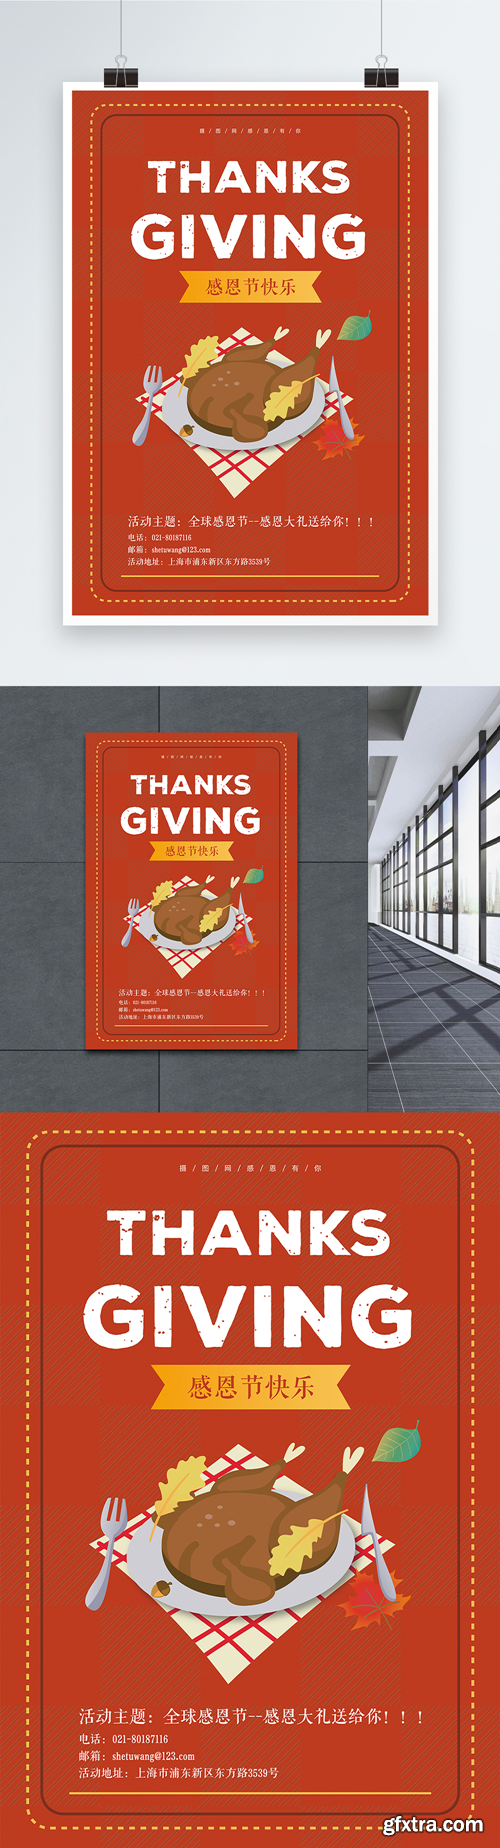 english font poster for thanksgiving day activities